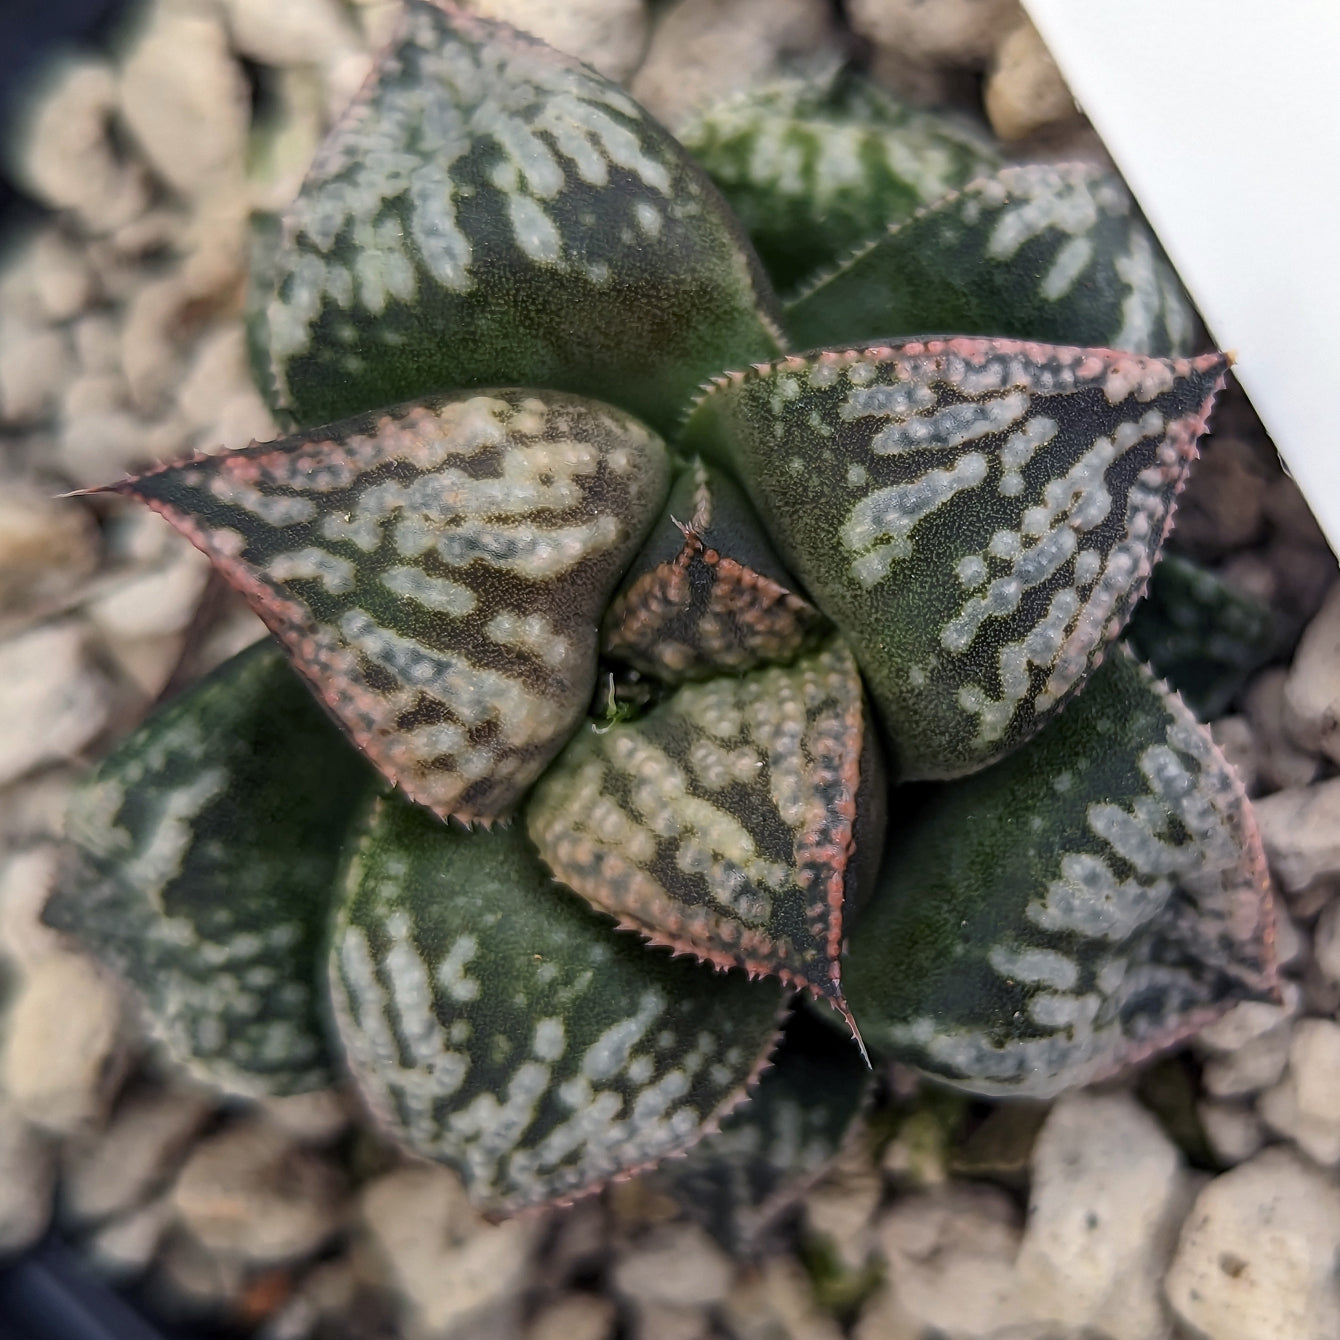 Haworthia "PP332" picta x Empress hybrid series #26 SOLD OUT